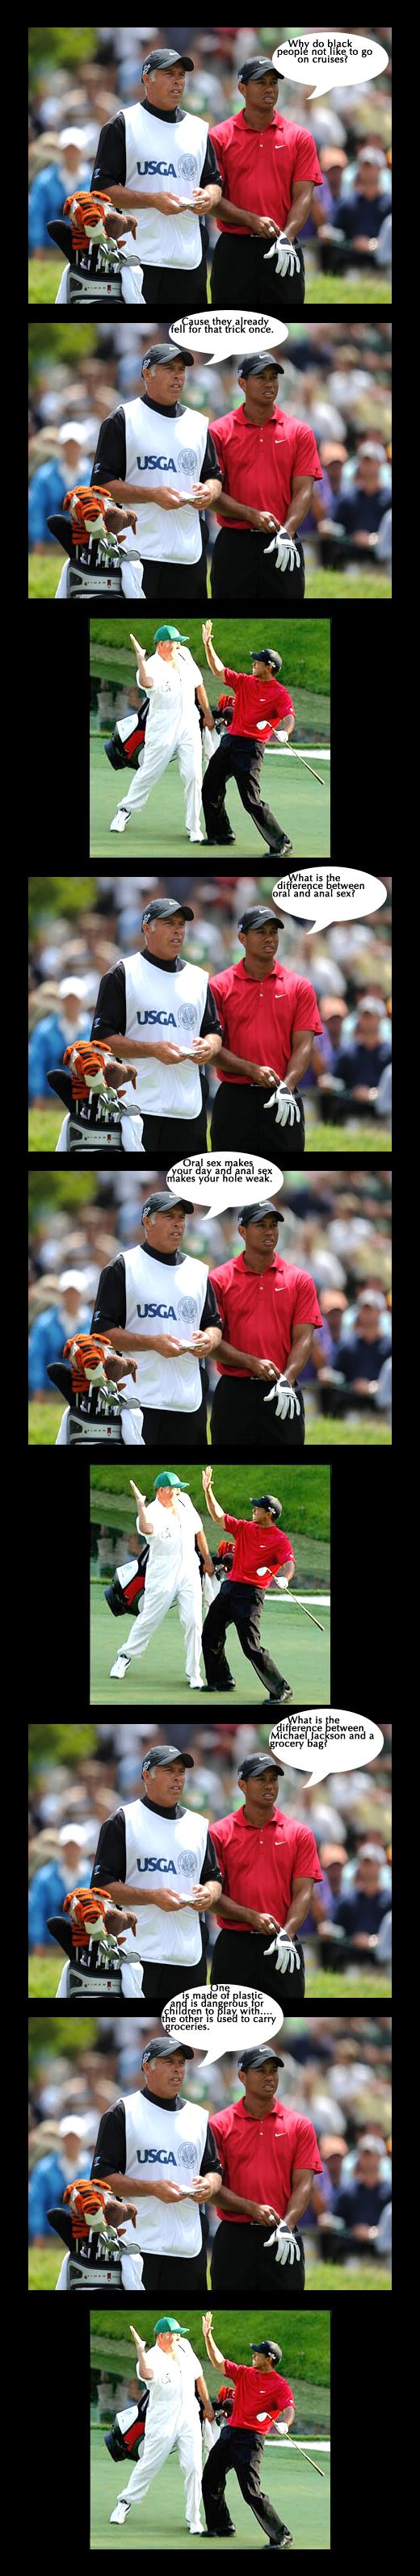 Dirty Jokes with Tiger Woods